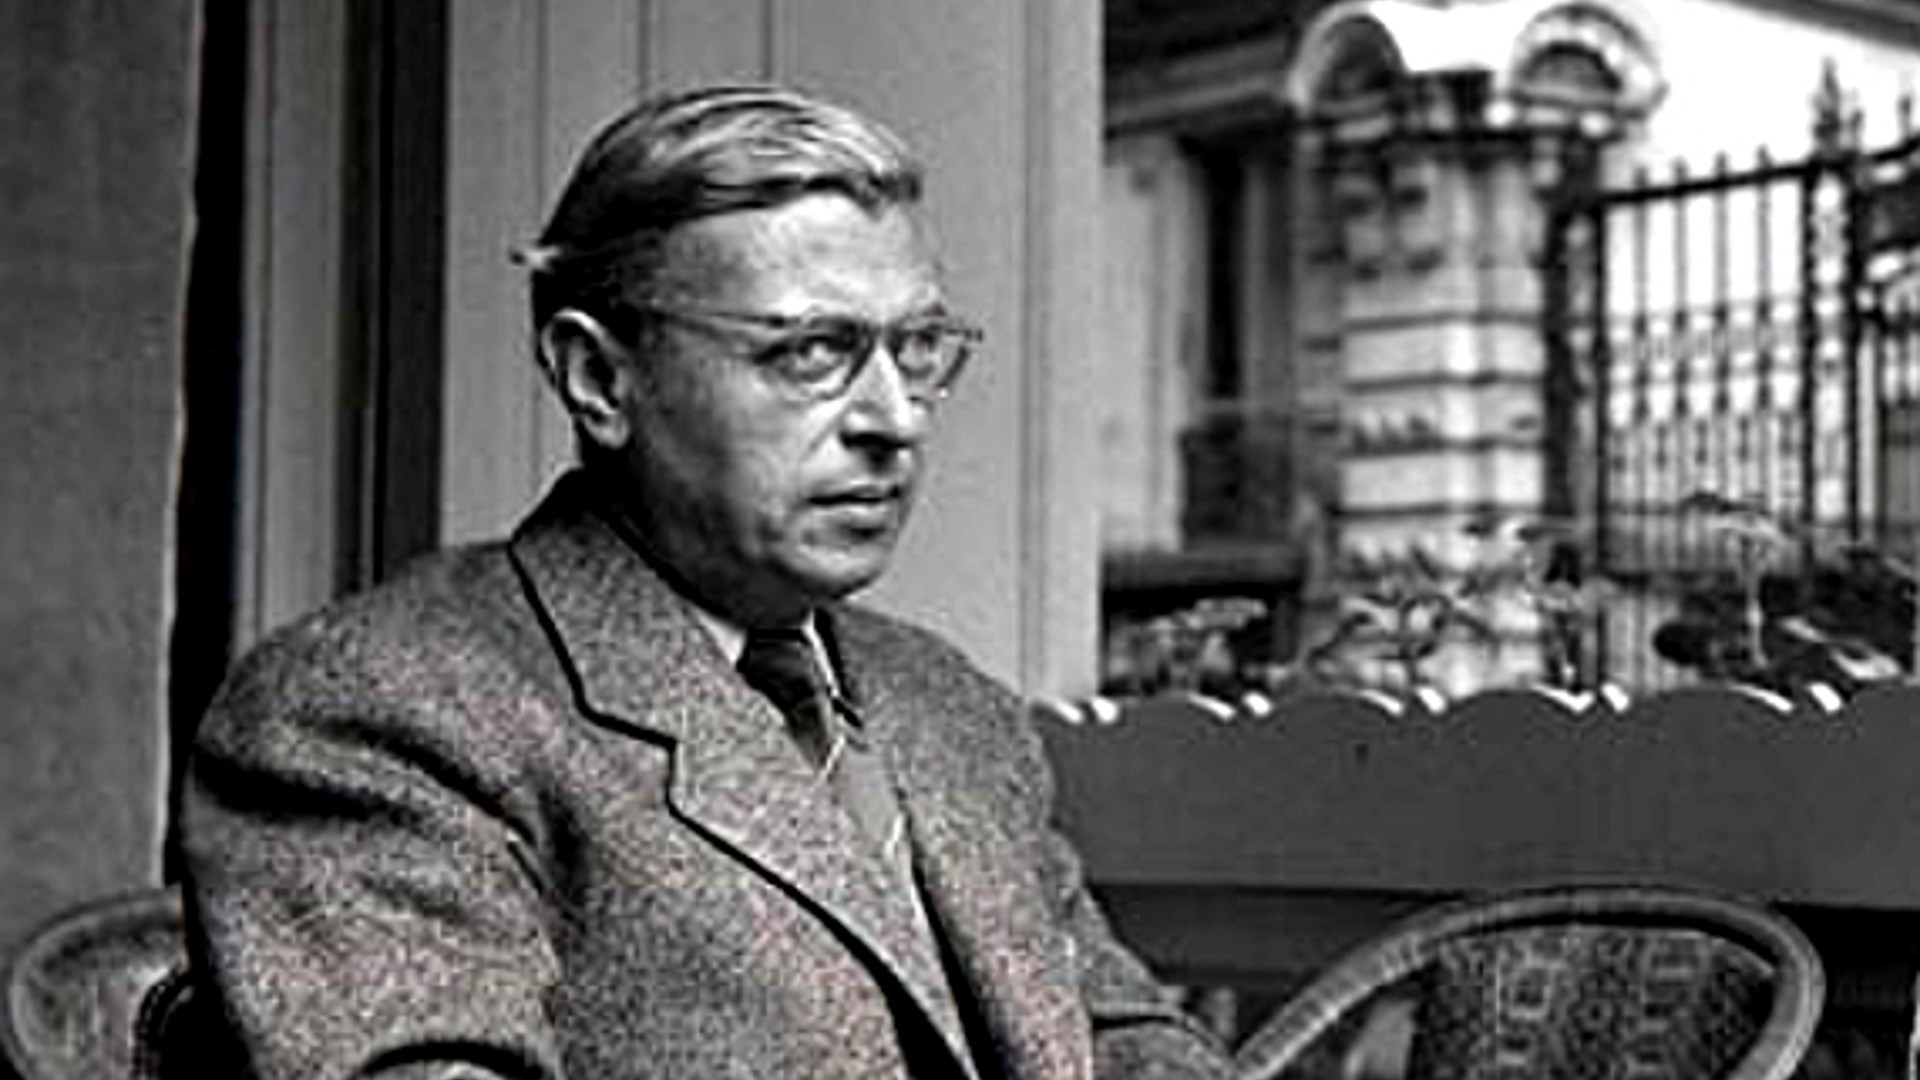 A black and white photo of Jean-Paul Sartre.